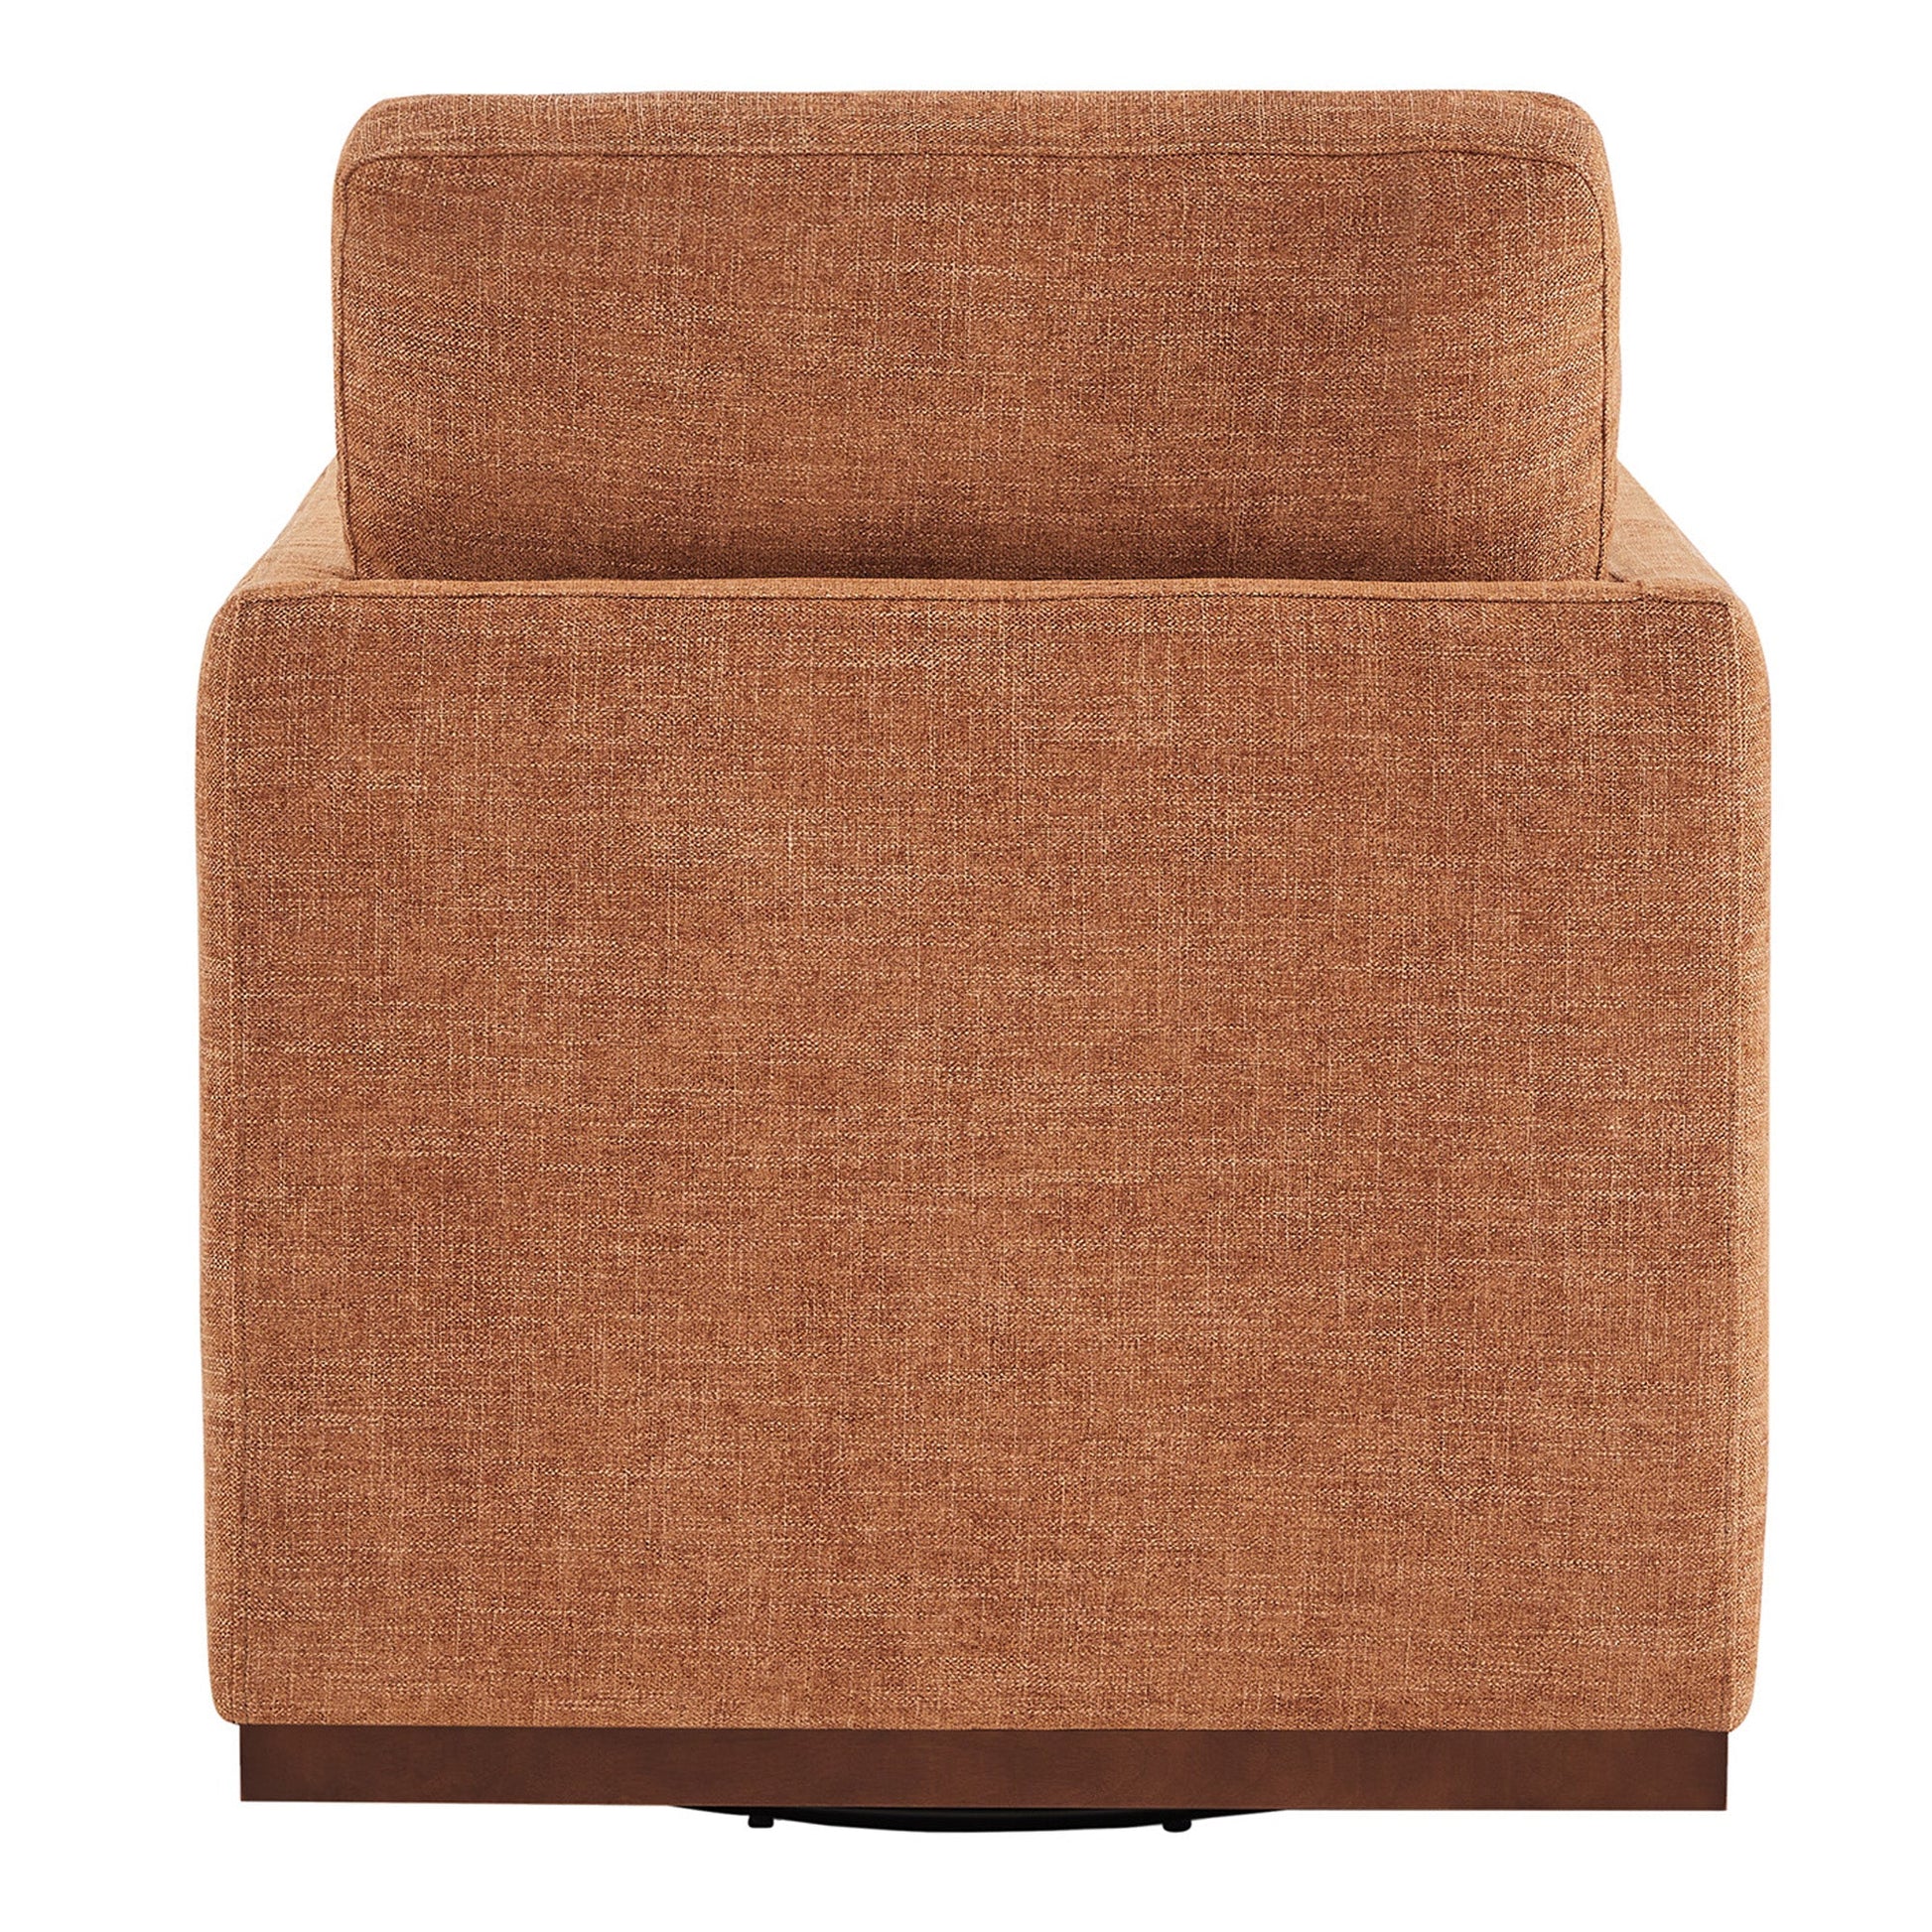 CHITA LIVING-Henry Swivel Accent Chair with Wood Base-Accent Chair-Fabric-Fossil Grey-